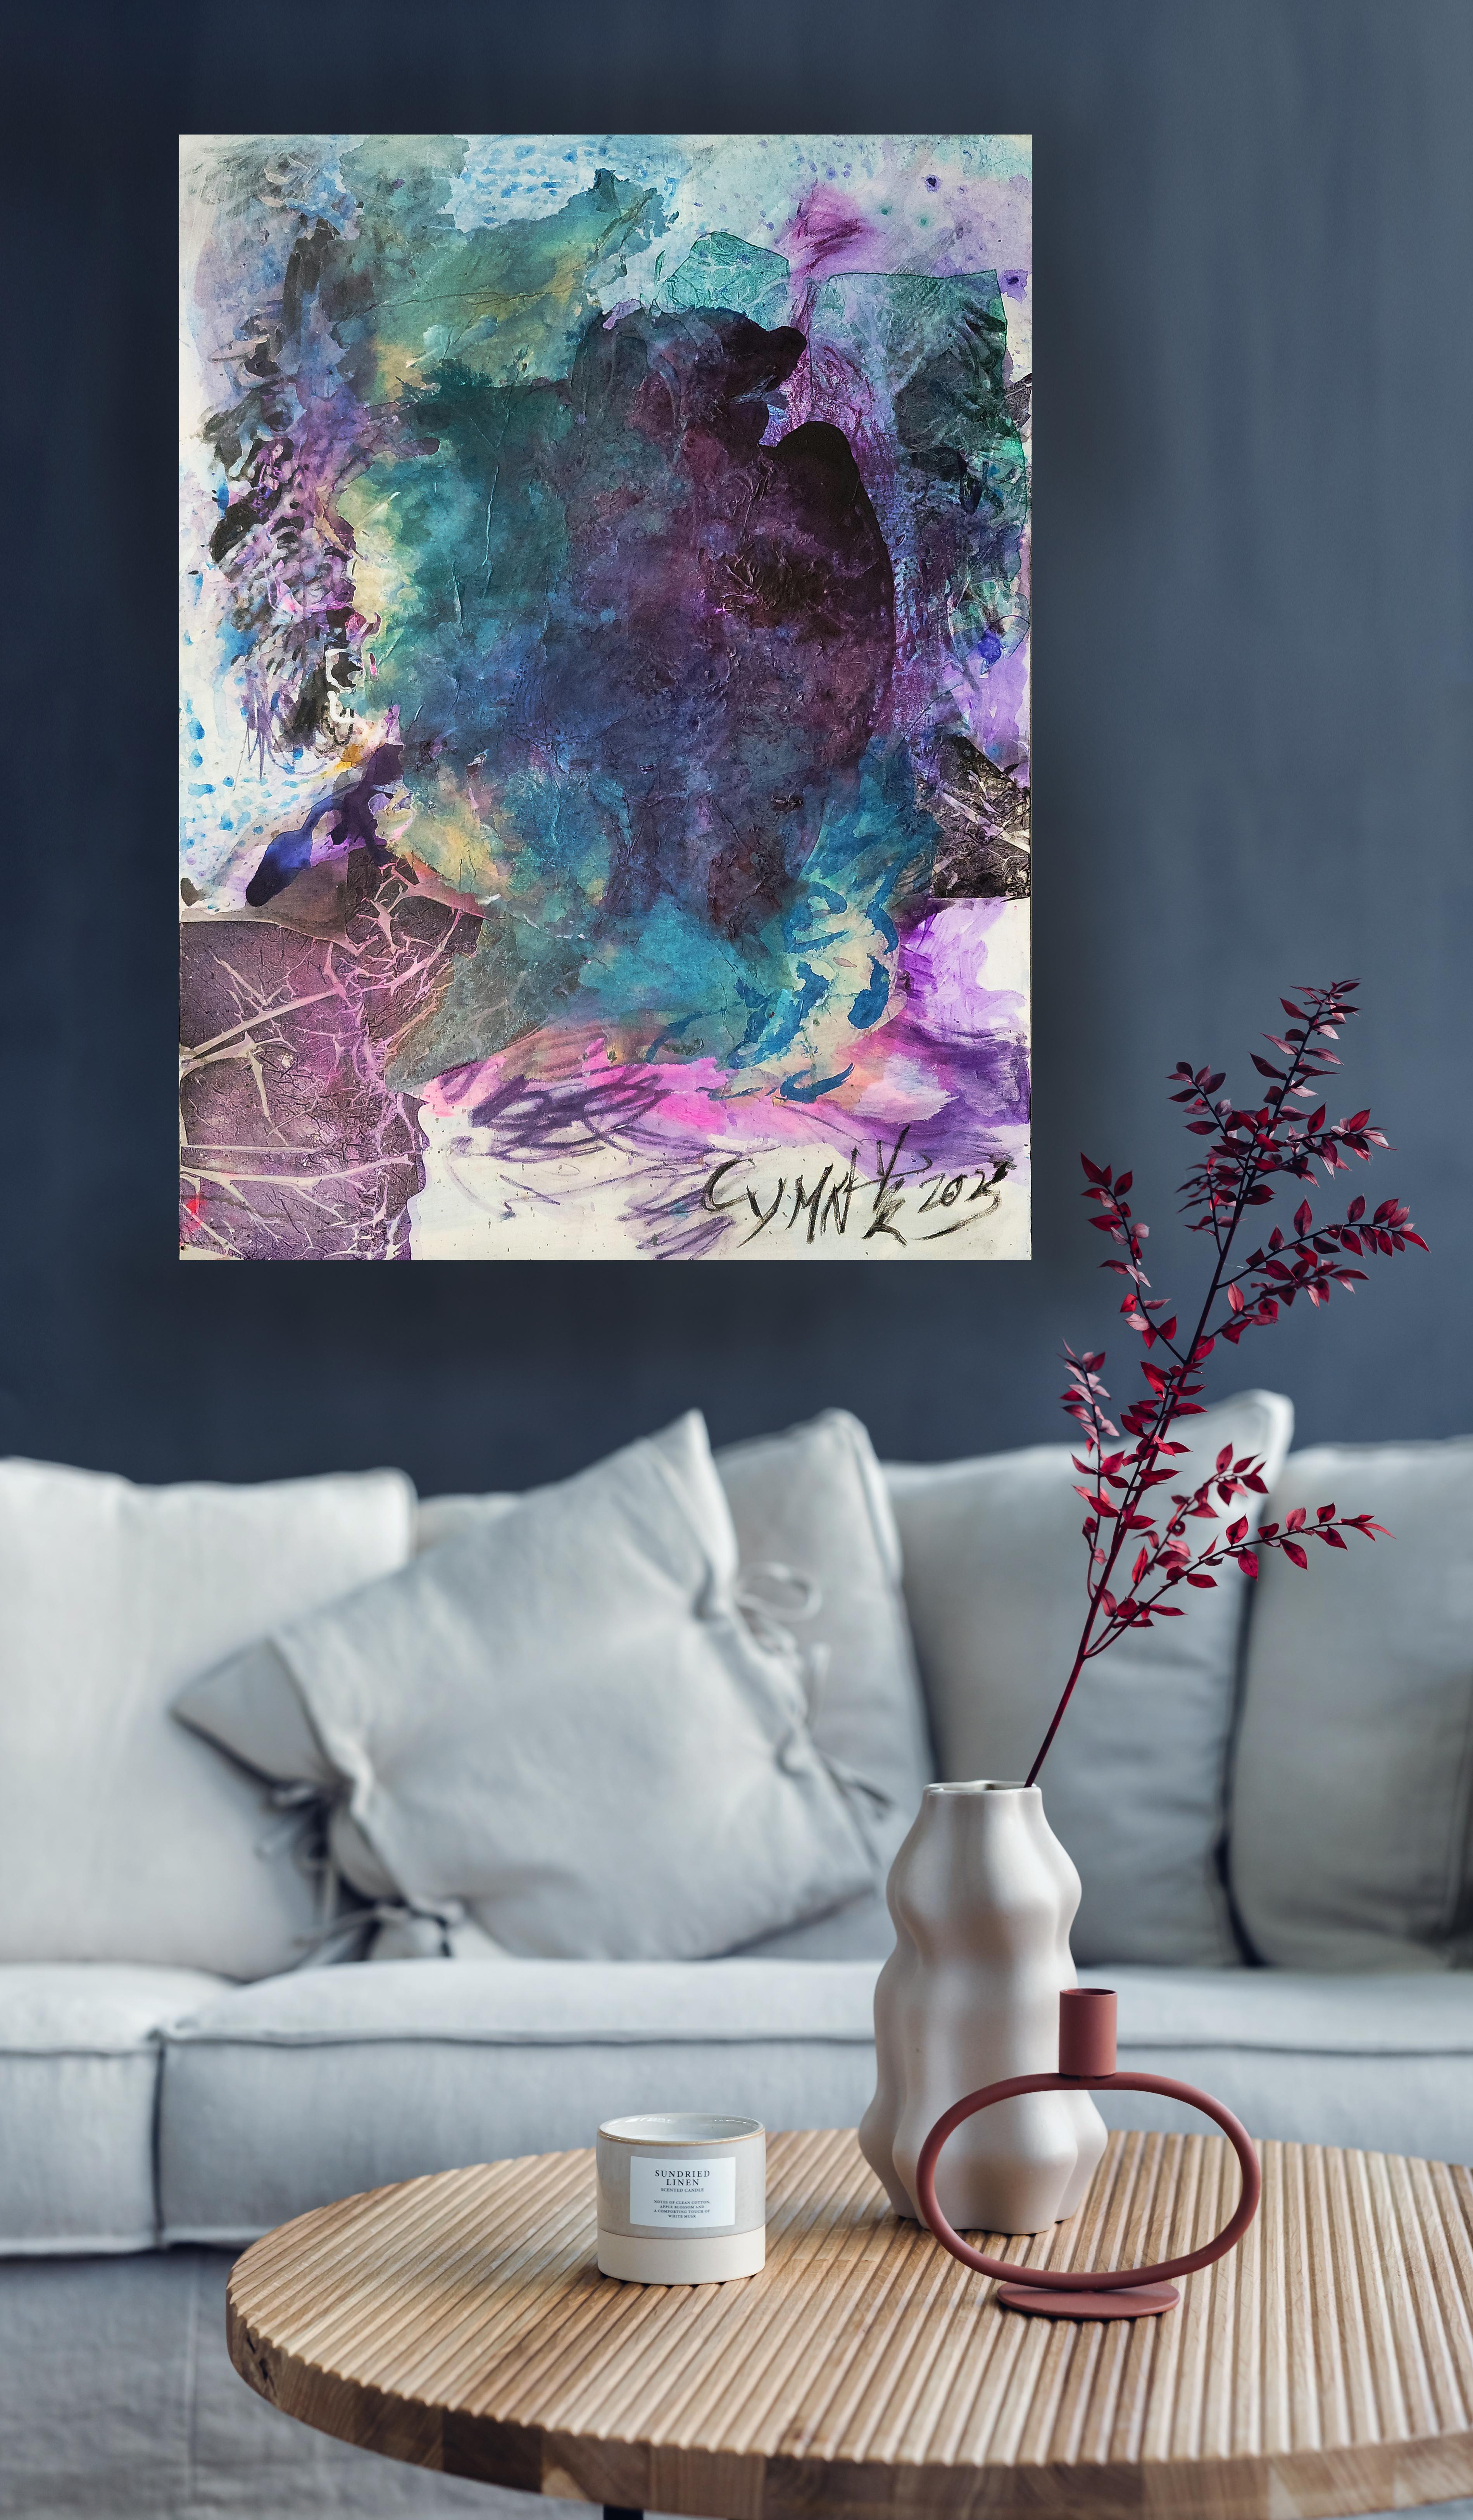 Emerge and Transcend- Expressive, Abstract Landscape, Zen Calligraphy  - Abstract Expressionist Painting by Cymn Wong 